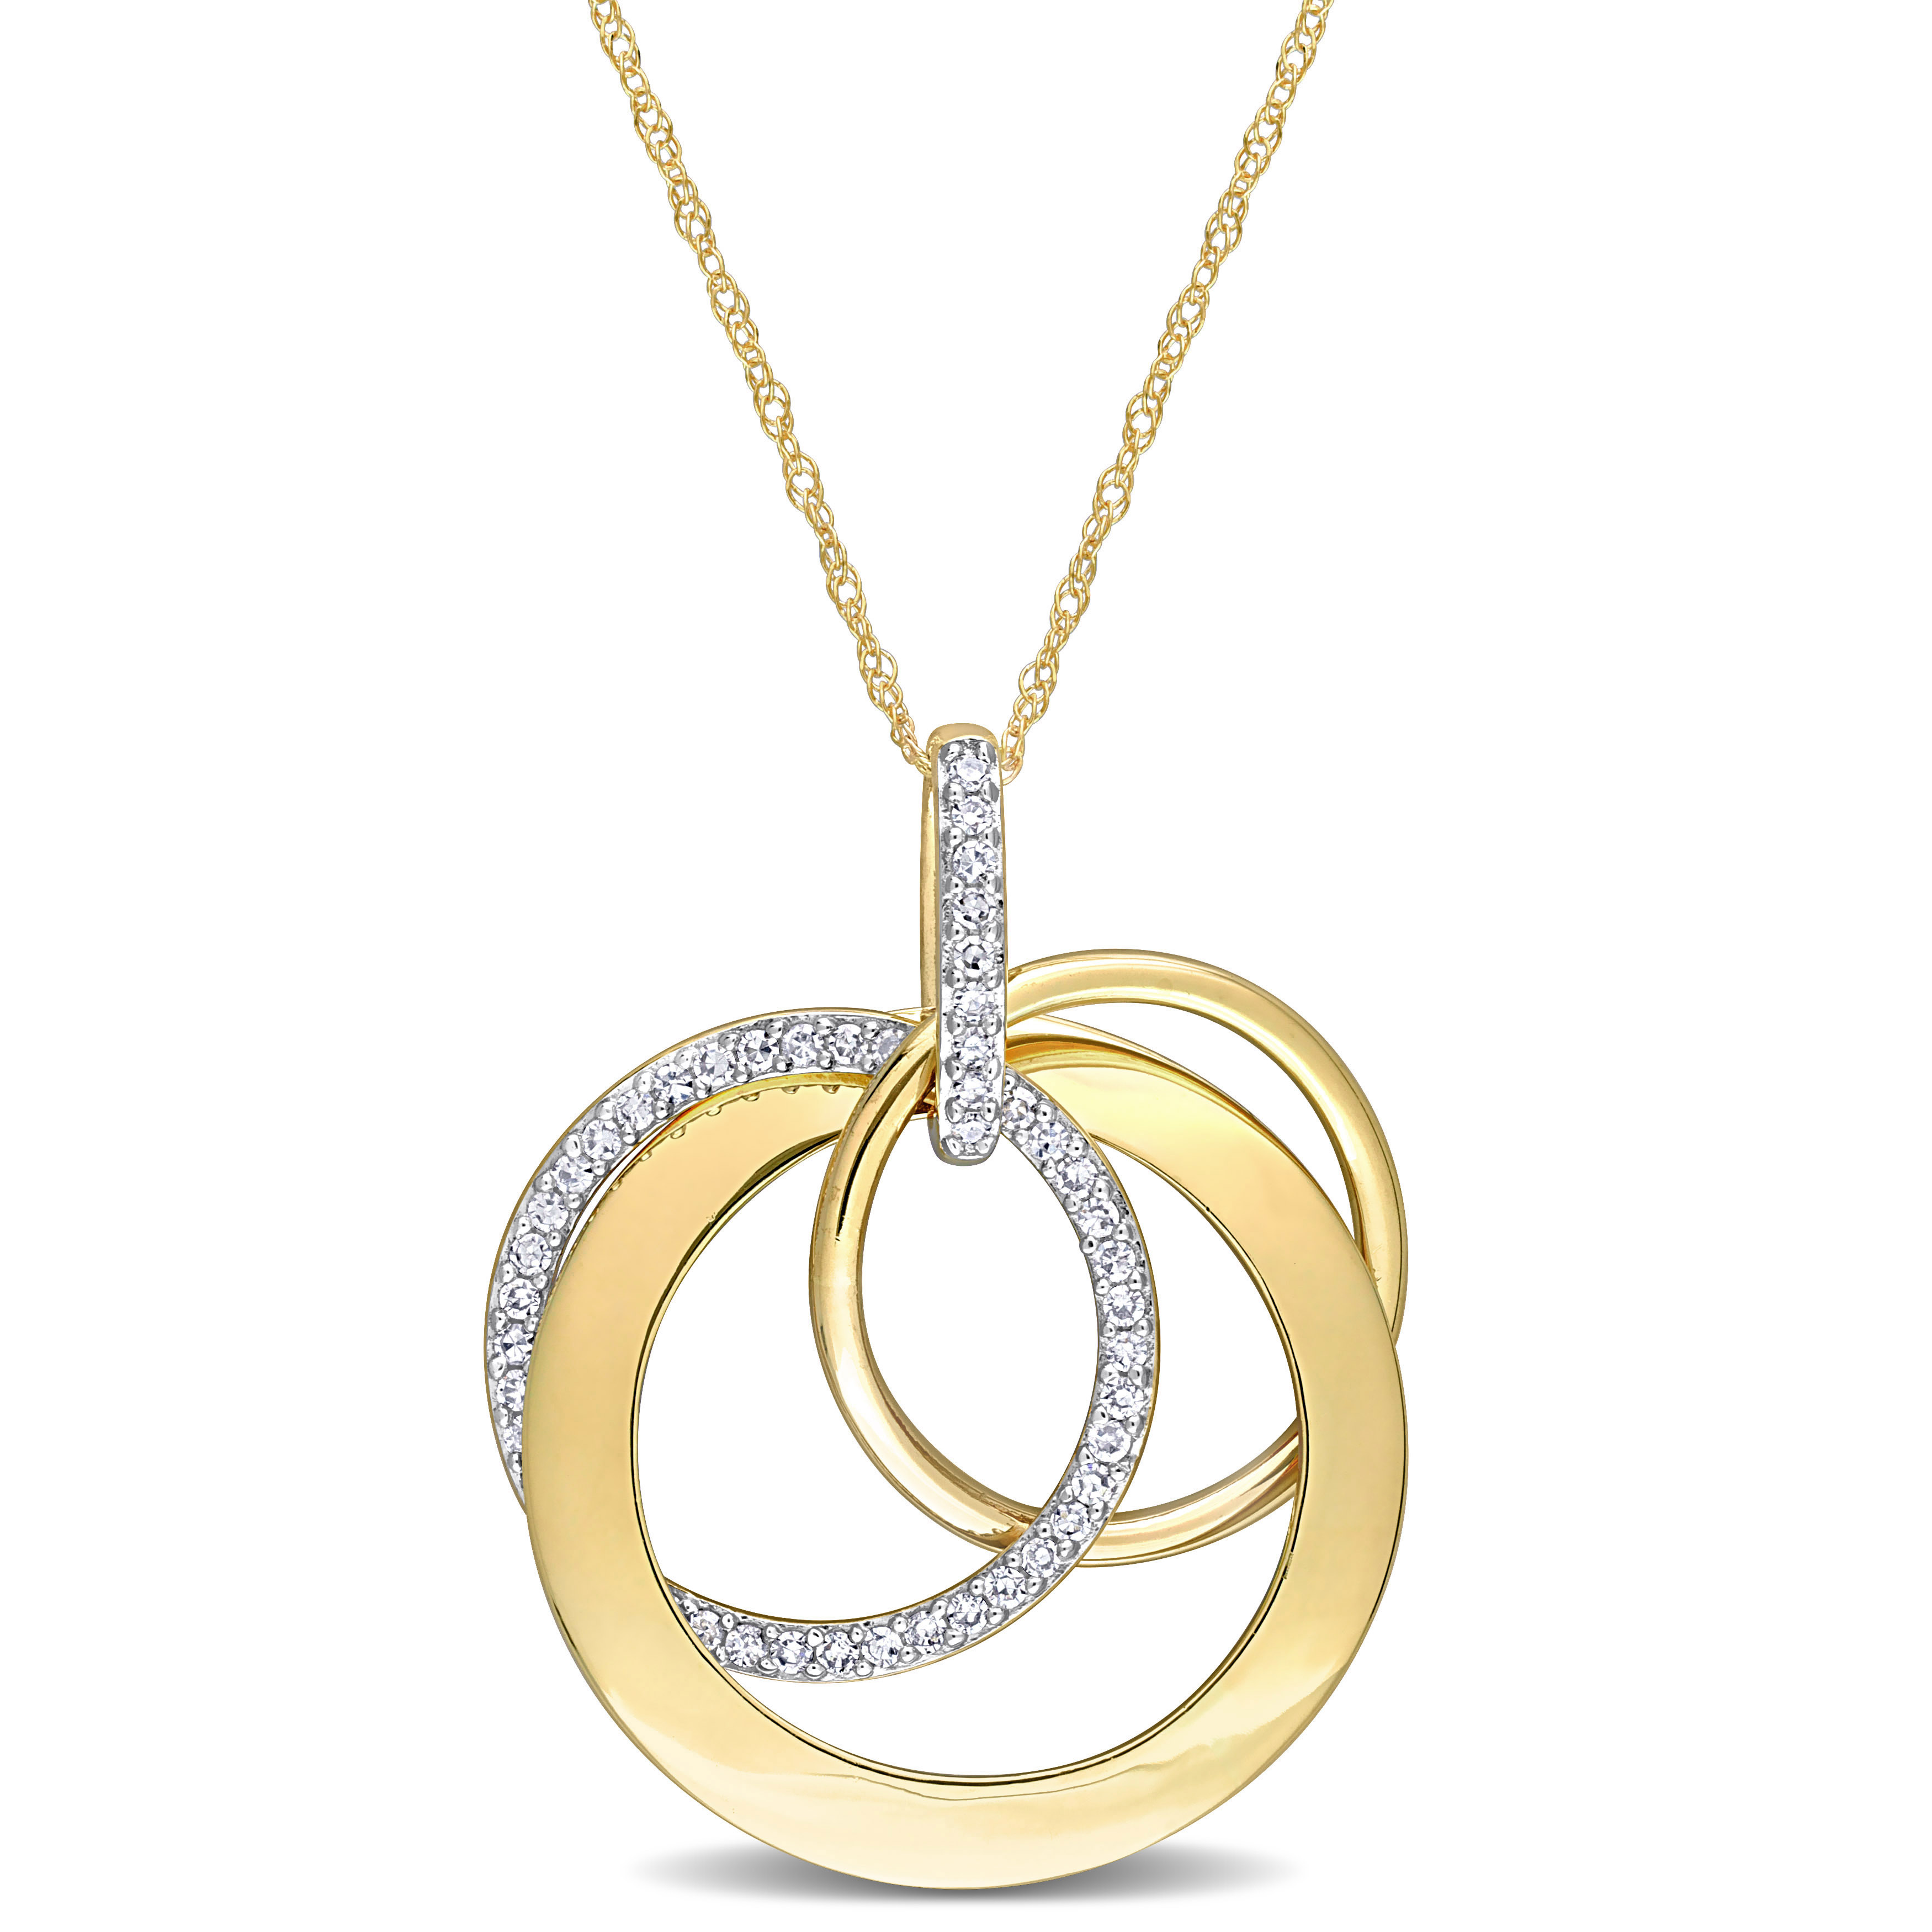 1/4 CT TDW Diamond Circle Pendant with Chain in 14k Yellow Gold